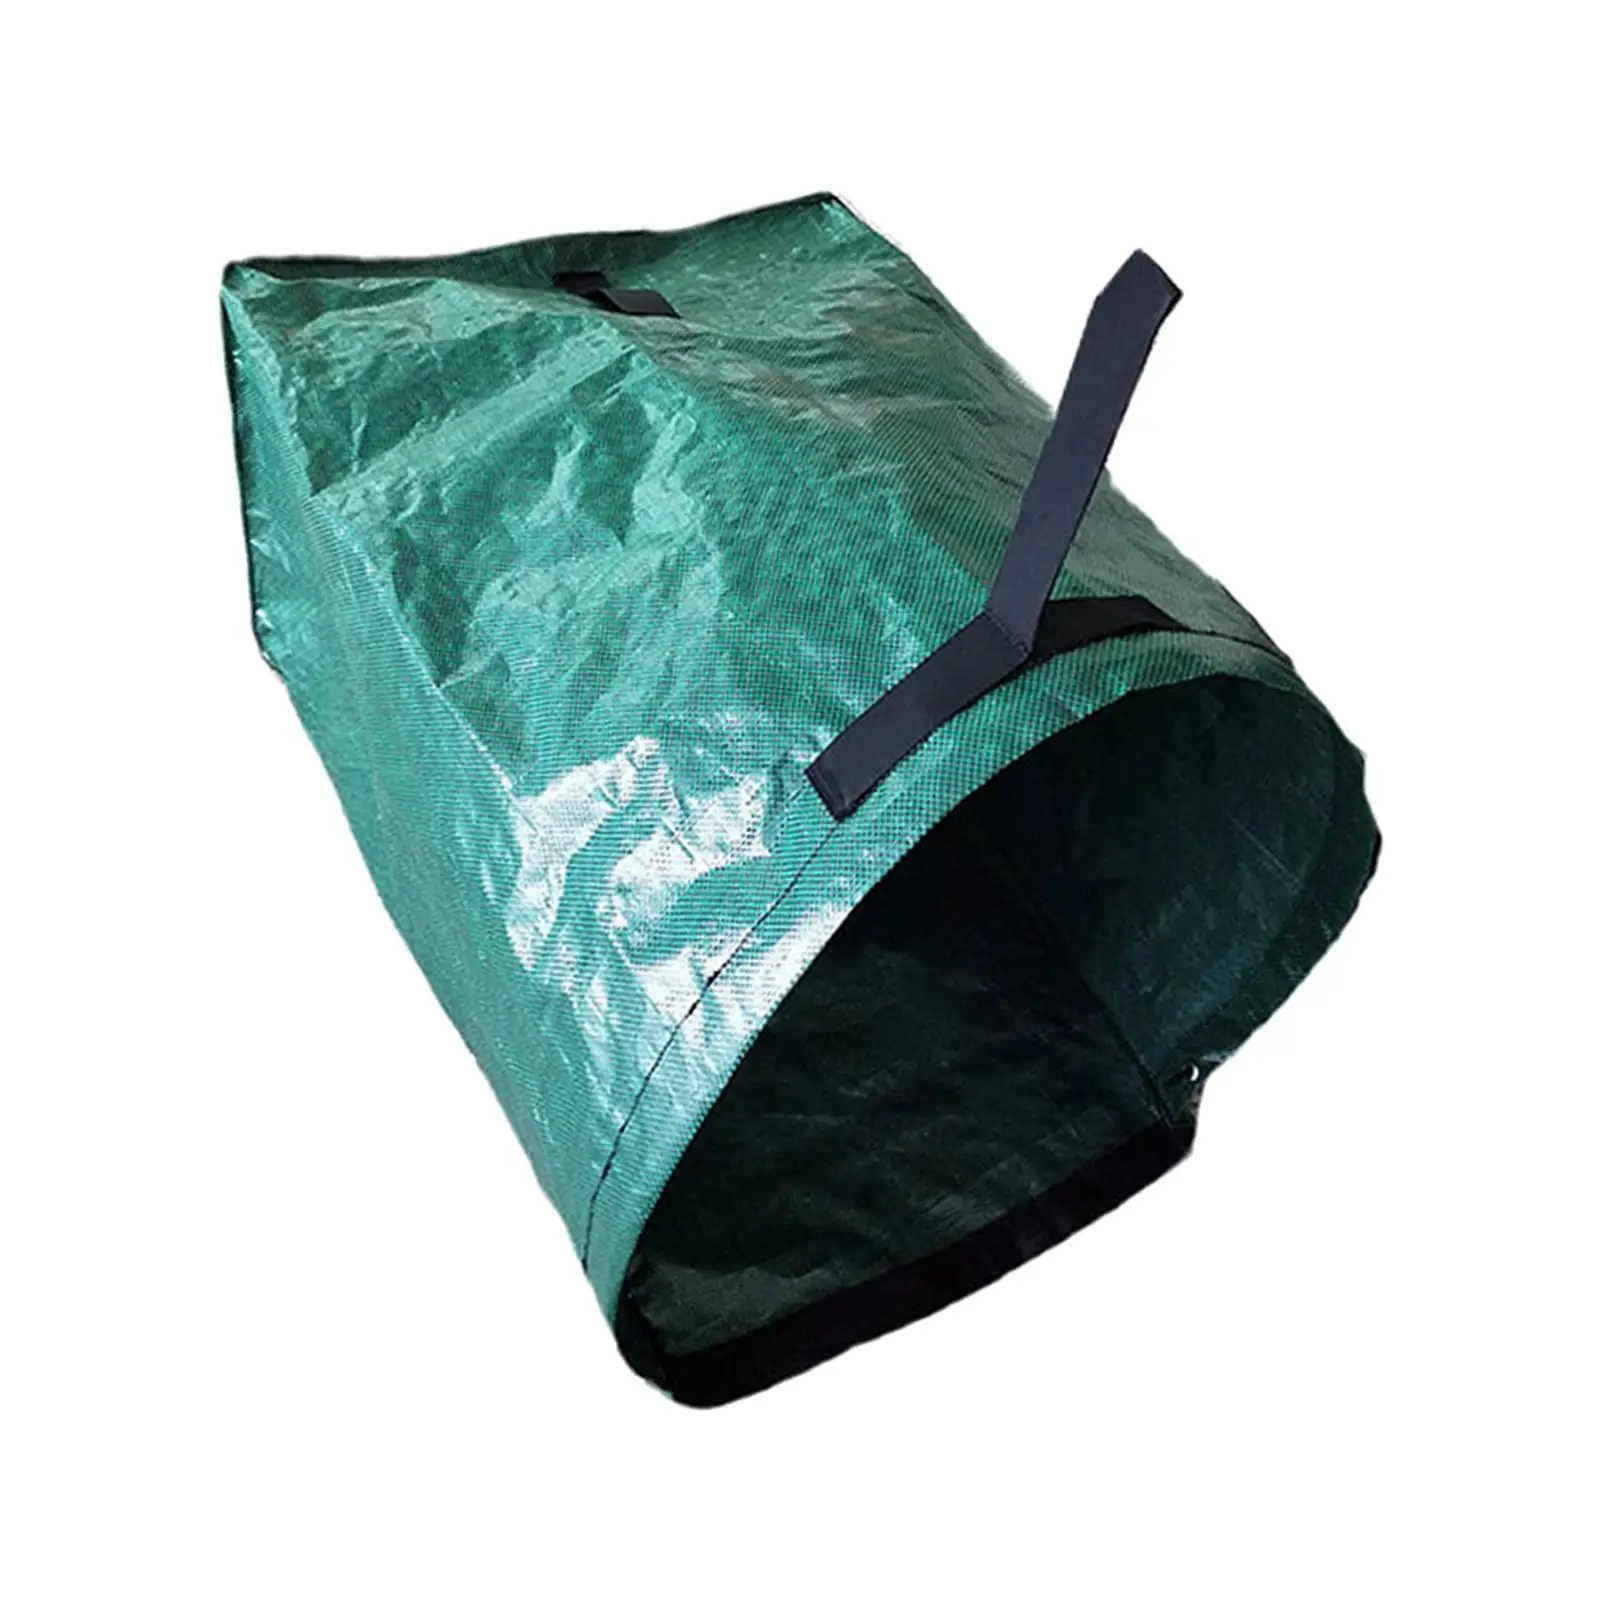 Garden Leaves Bag 53 gallons Storage Bag Leaf Collection Bag Heavy Duty Collection Container Composte Bag for Outdoor Patio